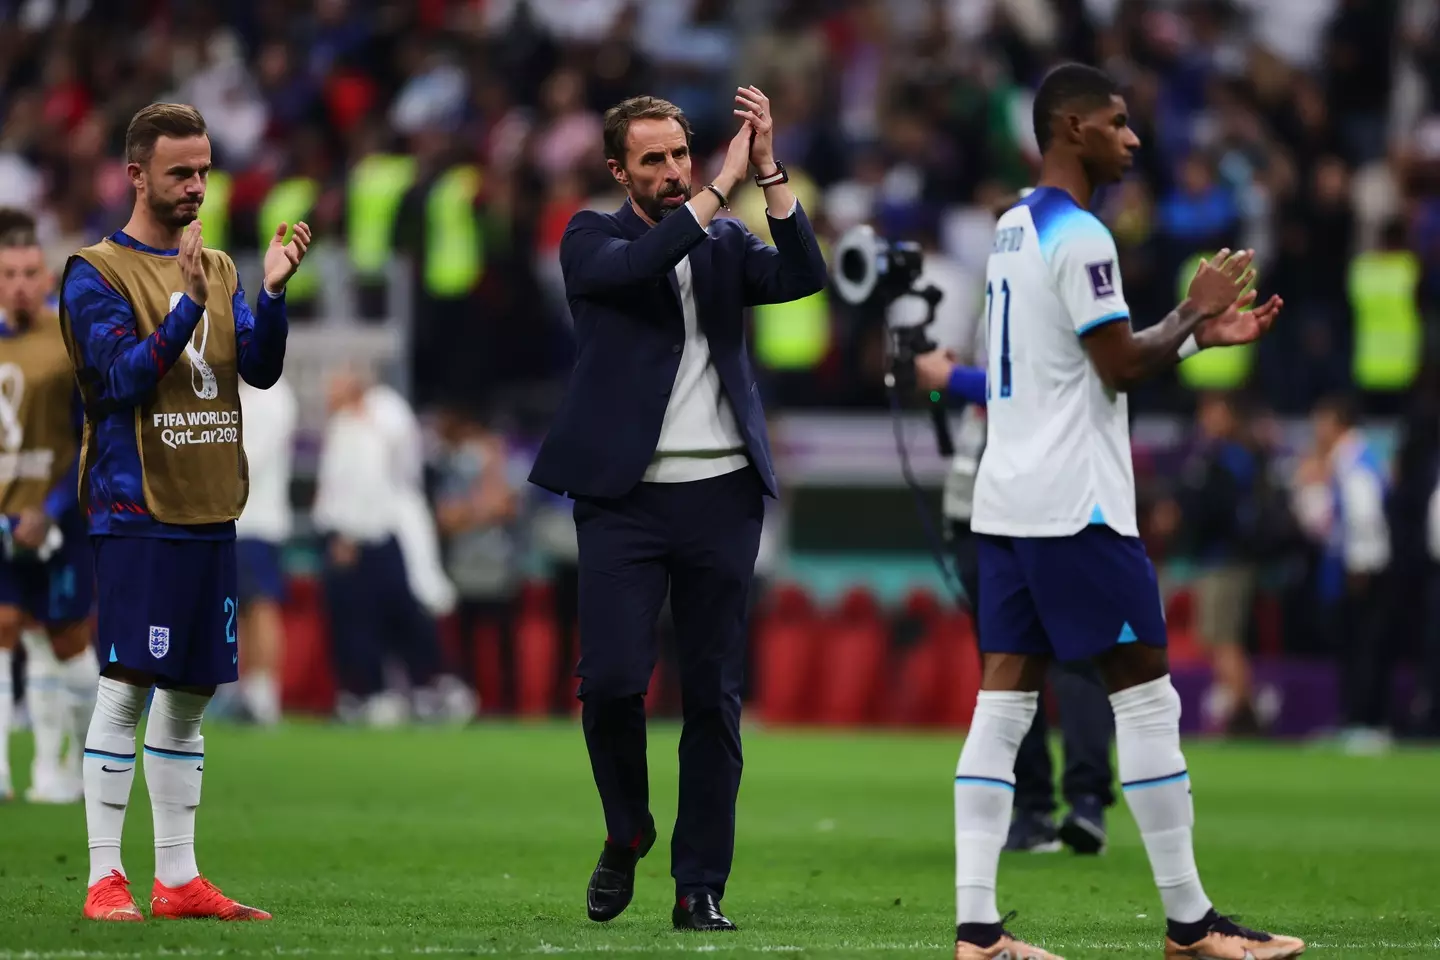 Southgate's future is uncertain right now. Image: Alamy